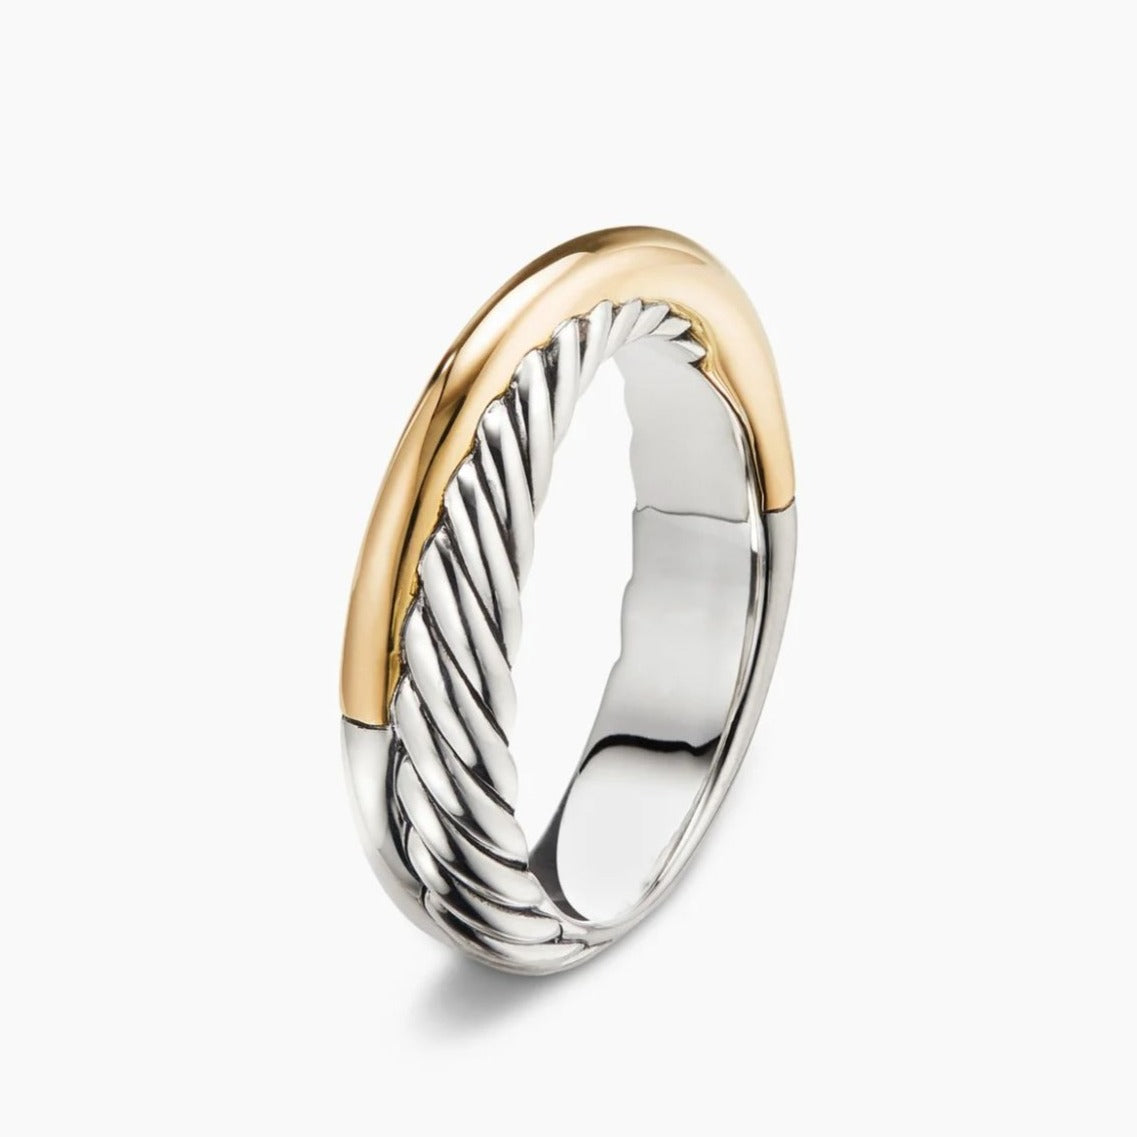 Elegant Two-Tone Twisted Cable Ring in 925 Silver and Gold Purl